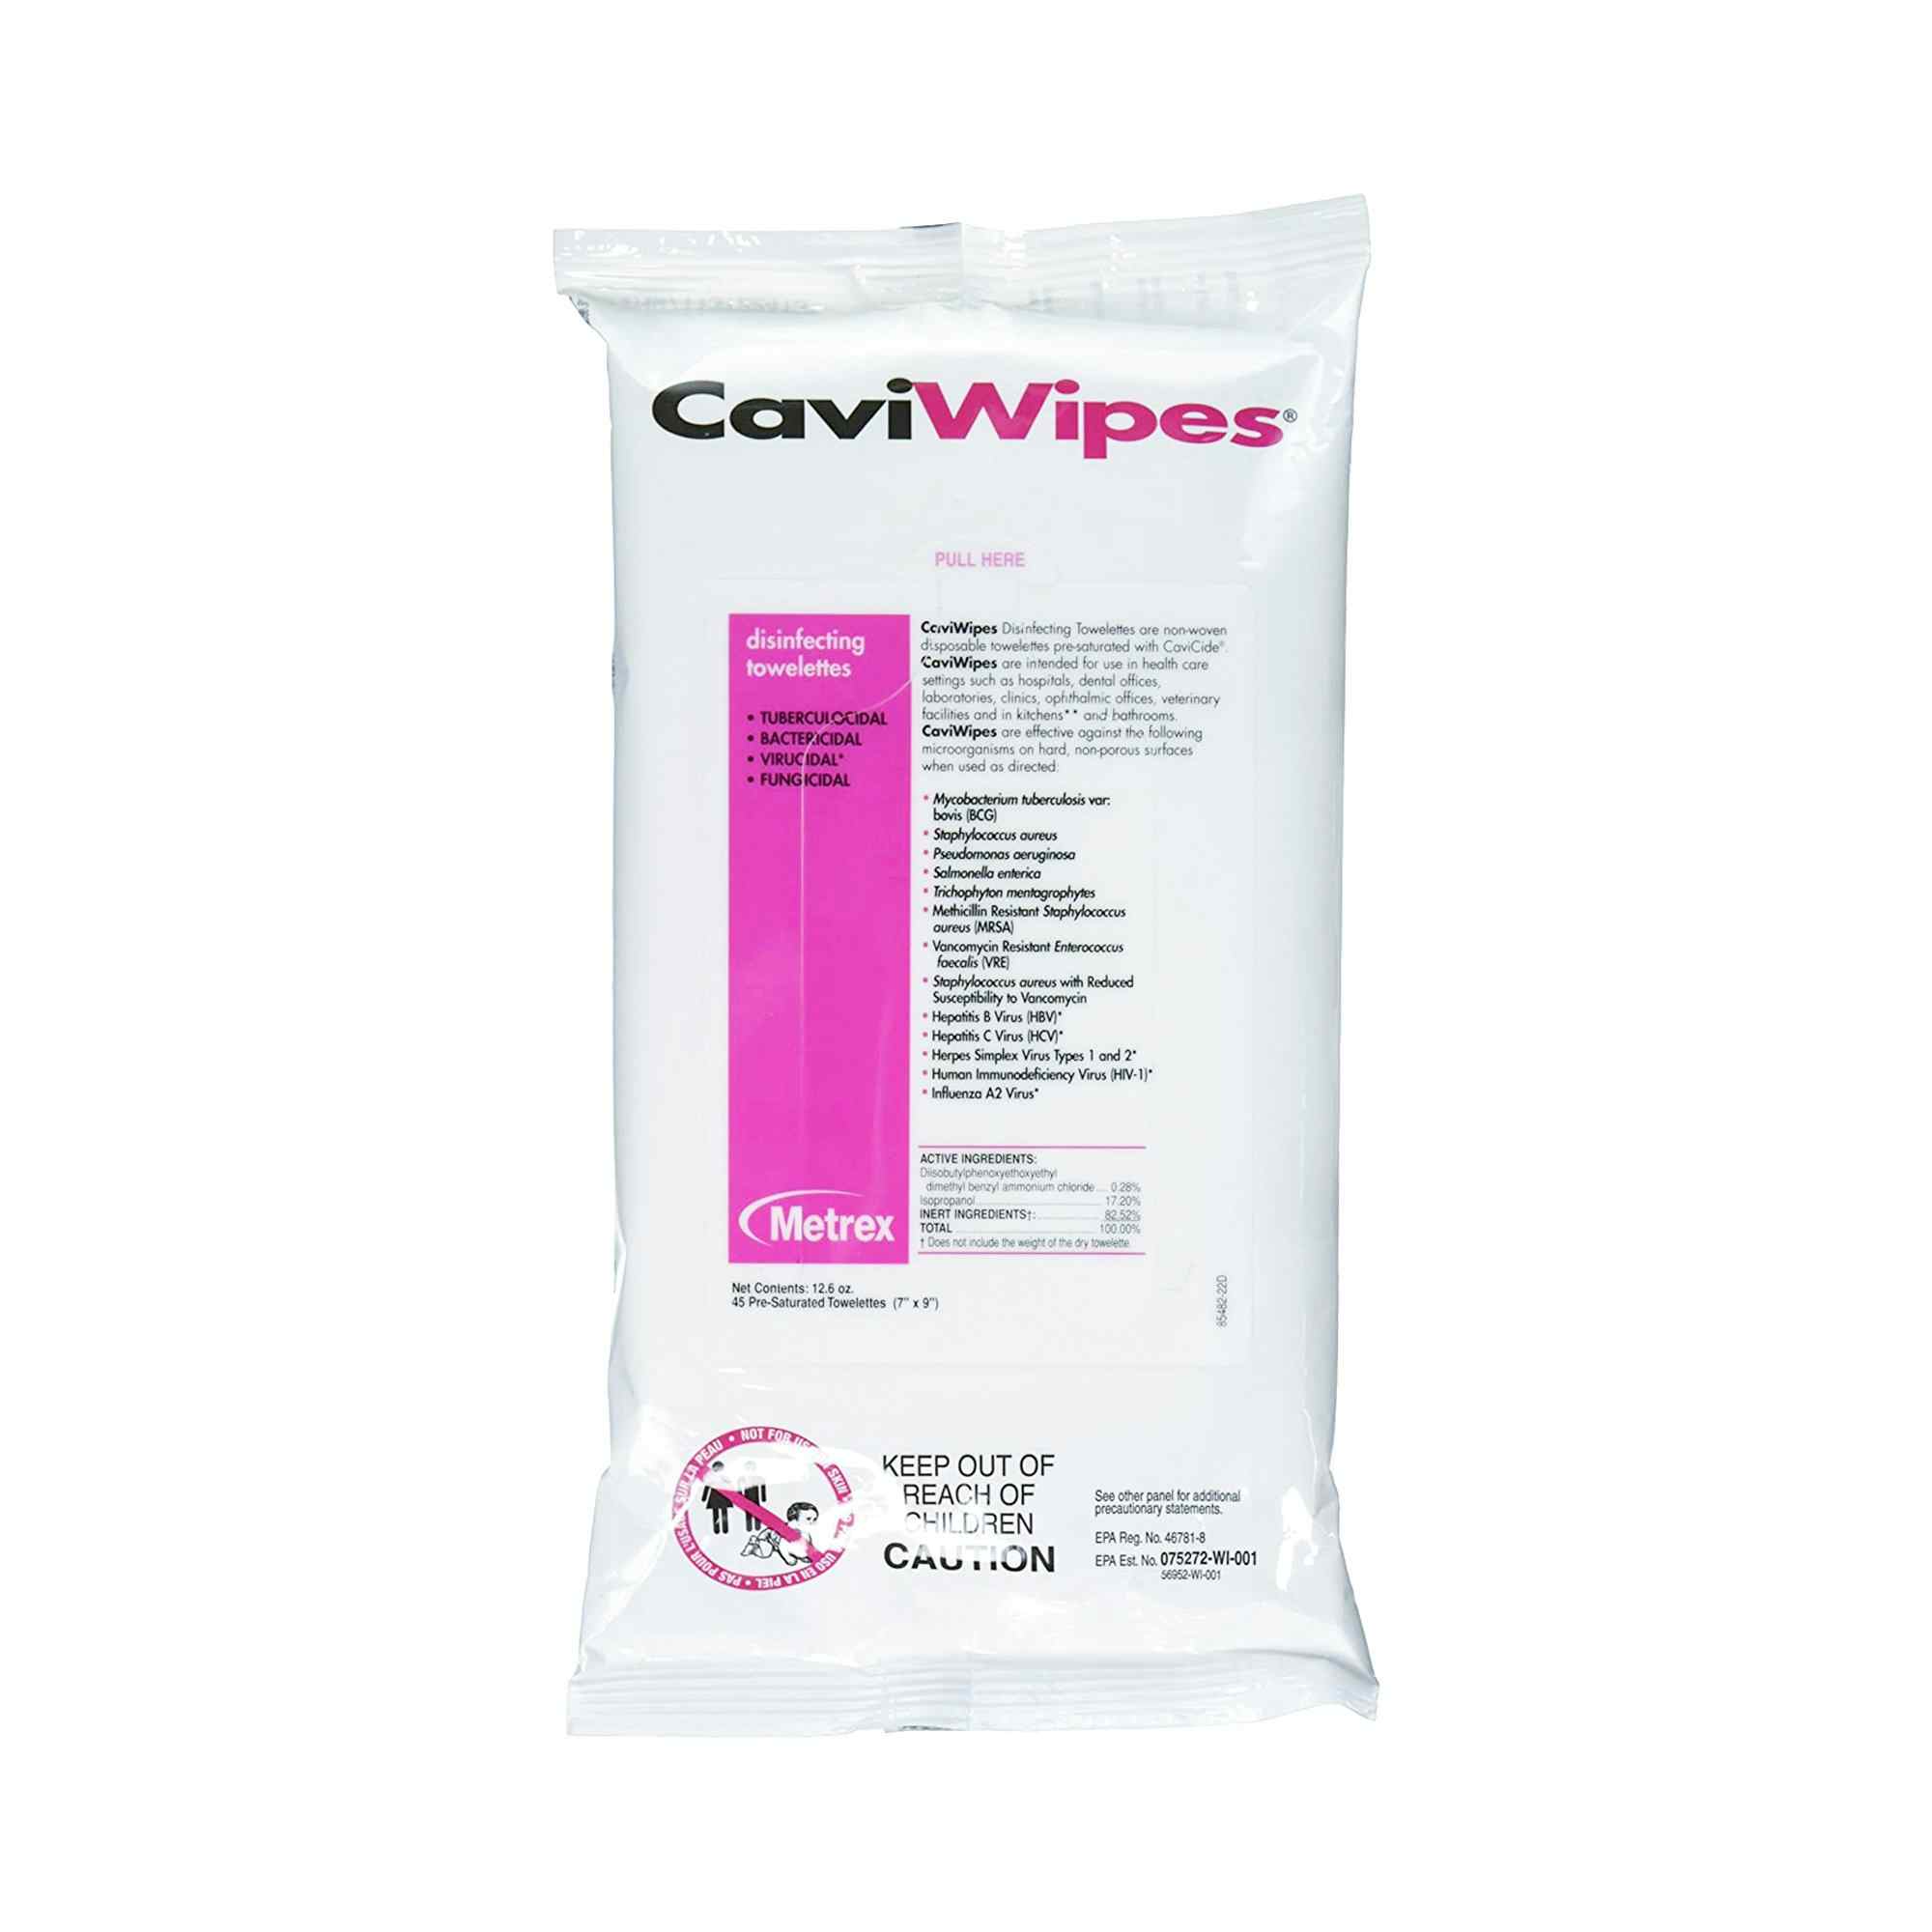 CaviWipes1 Surface Disinfectant Premoistened Alcohol Based Wipe, NonSterile, 13-5224, 7 X 9" - 1 Pack